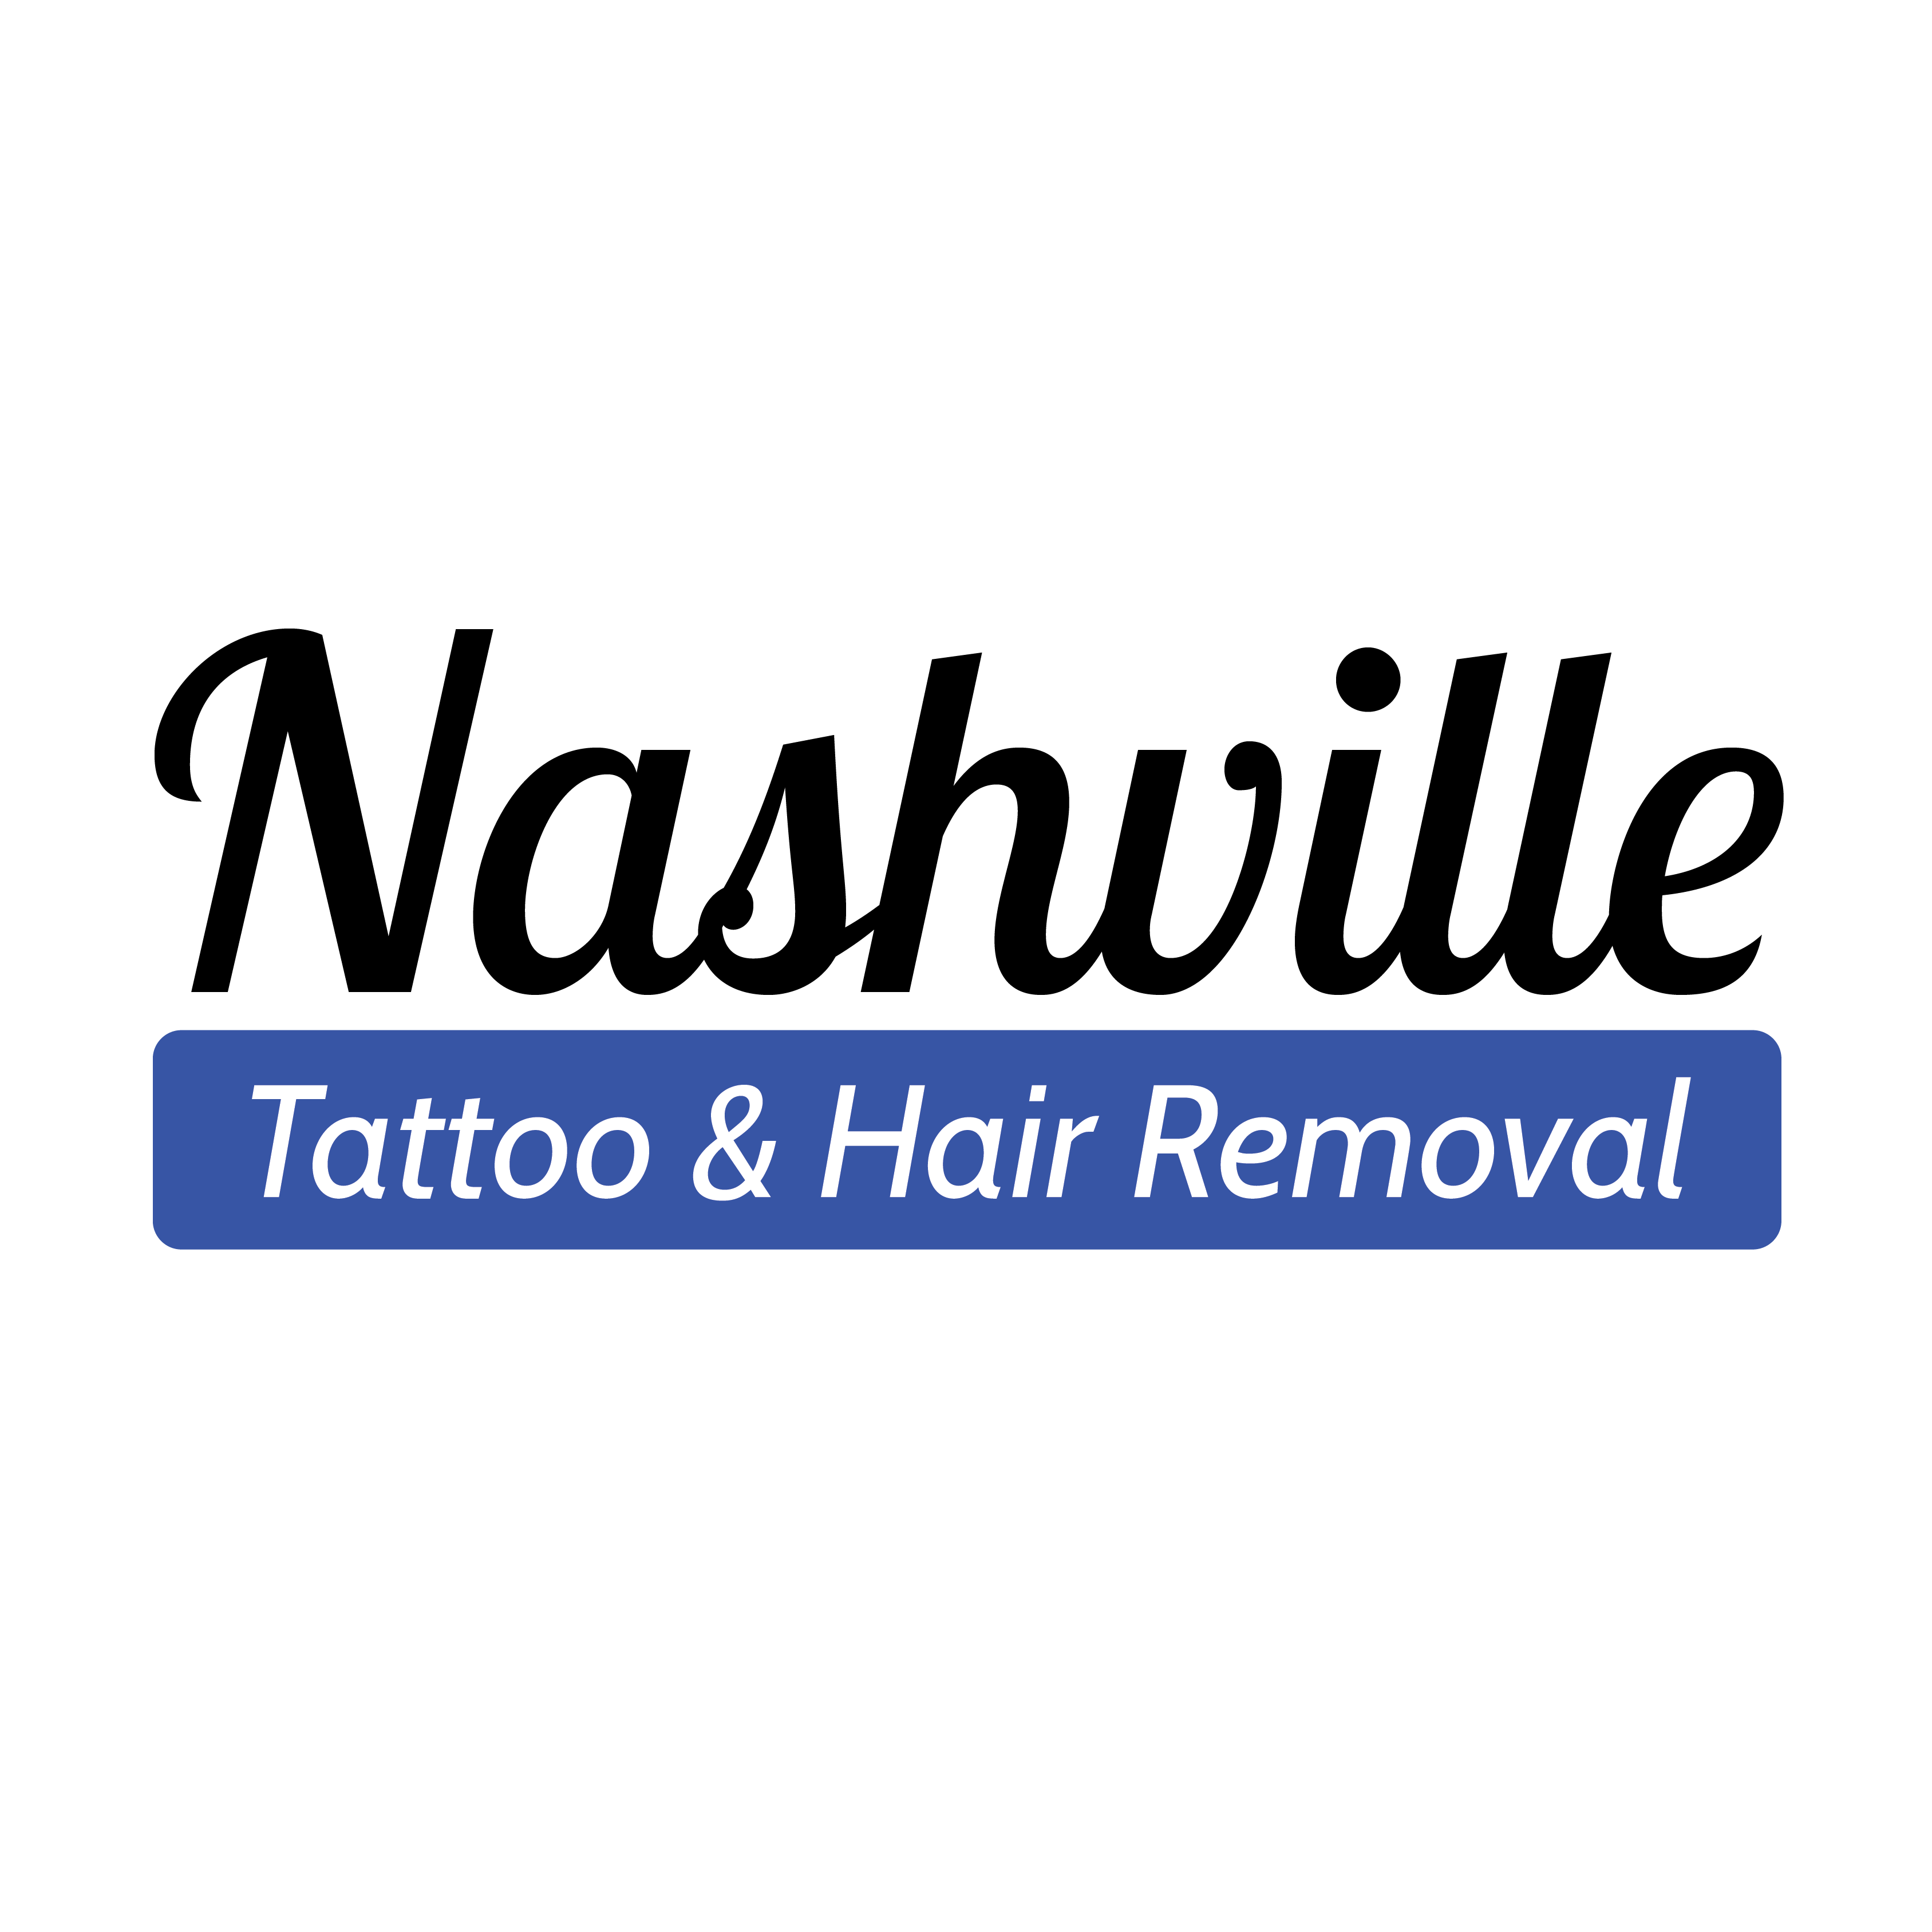 Nashville Tattoo Removal coupons and savings, 411 East Iris Dr ...